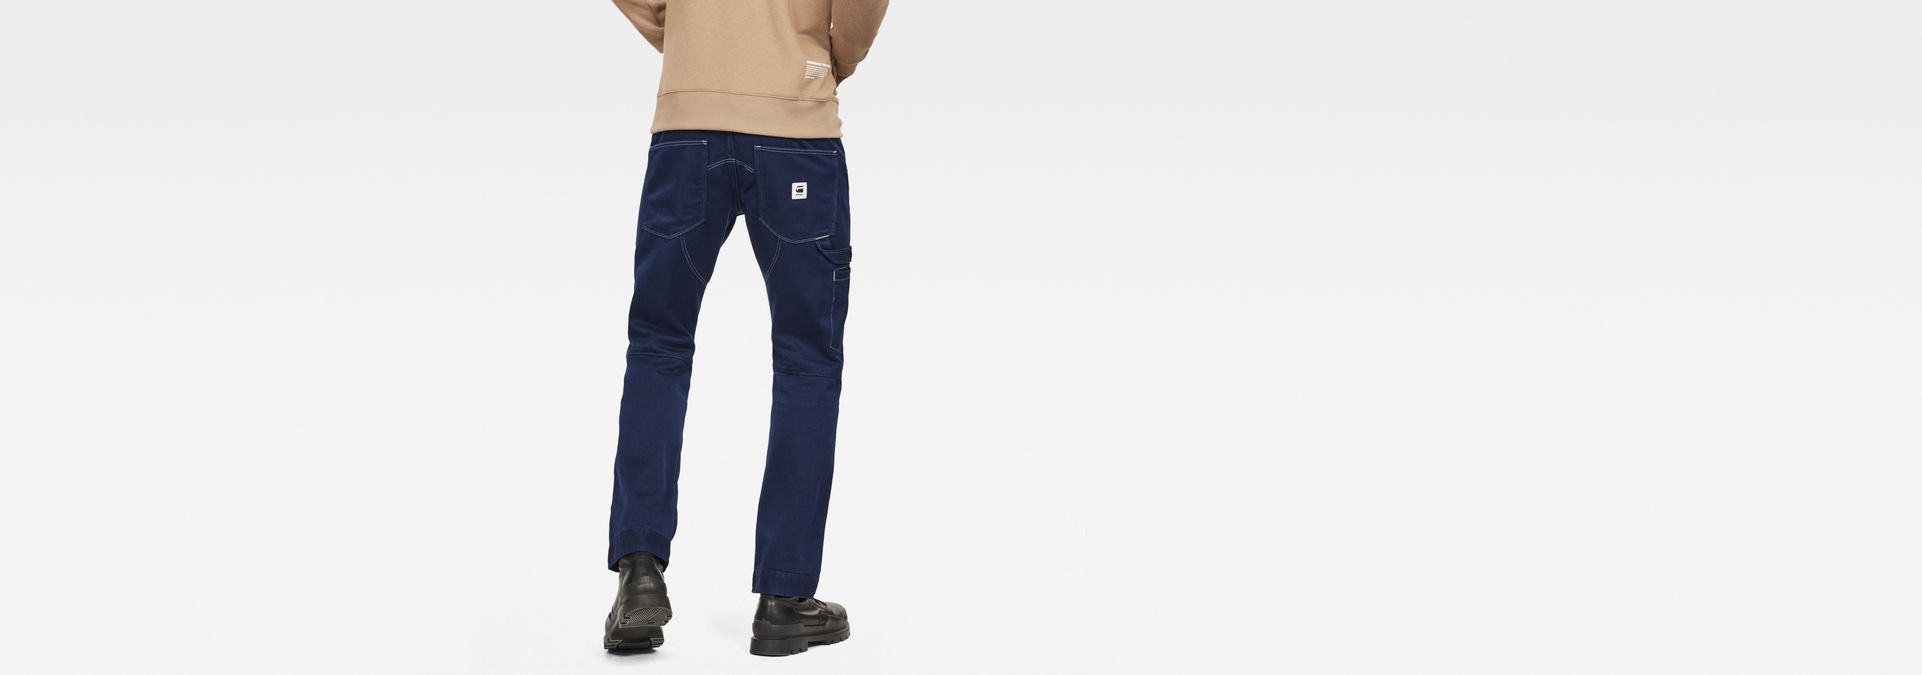 g star worker jeans